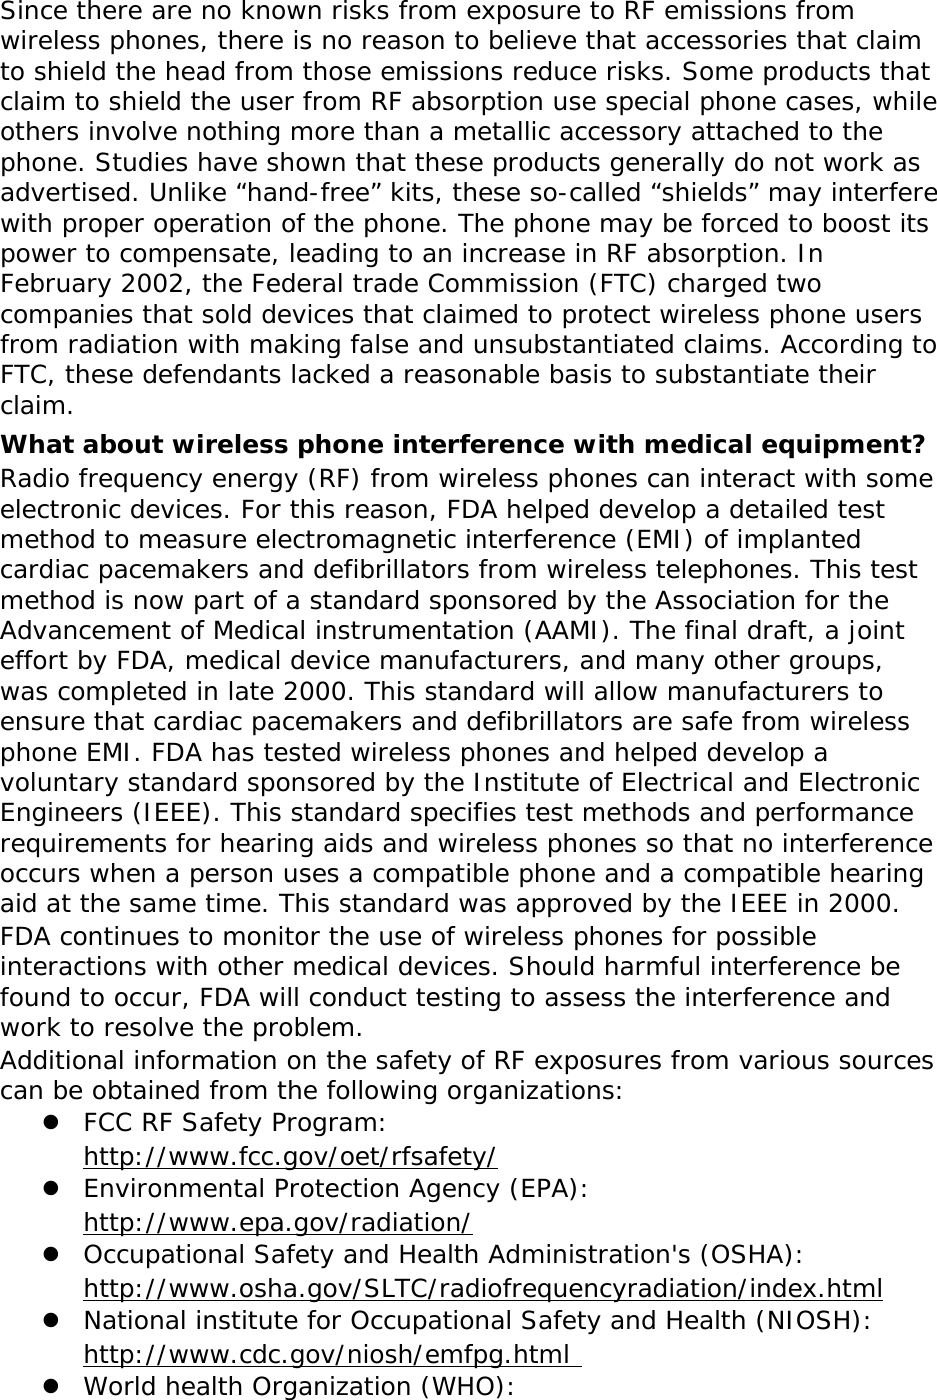 Since there are no known risks from exposure to RF emissions from wireless phones, there is no reason to believe that accessories that claim to shield the head from those emissions reduce risks. Some products that claim to shield the user from RF absorption use special phone cases, while others involve nothing more than a metallic accessory attached to the phone. Studies have shown that these products generally do not work as advertised. Unlike “hand-free” kits, these so-called “shields” may interfere with proper operation of the phone. The phone may be forced to boost its power to compensate, leading to an increase in RF absorption. In February 2002, the Federal trade Commission (FTC) charged two companies that sold devices that claimed to protect wireless phone users from radiation with making false and unsubstantiated claims. According to FTC, these defendants lacked a reasonable basis to substantiate their claim. What about wireless phone interference with medical equipment? Radio frequency energy (RF) from wireless phones can interact with some electronic devices. For this reason, FDA helped develop a detailed test method to measure electromagnetic interference (EMI) of implanted cardiac pacemakers and defibrillators from wireless telephones. This test method is now part of a standard sponsored by the Association for the Advancement of Medical instrumentation (AAMI). The final draft, a joint effort by FDA, medical device manufacturers, and many other groups, was completed in late 2000. This standard will allow manufacturers to ensure that cardiac pacemakers and defibrillators are safe from wireless phone EMI. FDA has tested wireless phones and helped develop a voluntary standard sponsored by the Institute of Electrical and Electronic Engineers (IEEE). This standard specifies test methods and performance requirements for hearing aids and wireless phones so that no interference occurs when a person uses a compatible phone and a compatible hearing aid at the same time. This standard was approved by the IEEE in 2000. FDA continues to monitor the use of wireless phones for possible interactions with other medical devices. Should harmful interference be found to occur, FDA will conduct testing to assess the interference and work to resolve the problem. Additional information on the safety of RF exposures from various sources can be obtained from the following organizations:  FCC RF Safety Program:  http://www.fcc.gov/oet/rfsafety/  Environmental Protection Agency (EPA):  http://www.epa.gov/radiation/  Occupational Safety and Health Administration&apos;s (OSHA):        http://www.osha.gov/SLTC/radiofrequencyradiation/index.html  National institute for Occupational Safety and Health (NIOSH):  http://www.cdc.gov/niosh/emfpg.html   World health Organization (WHO): 